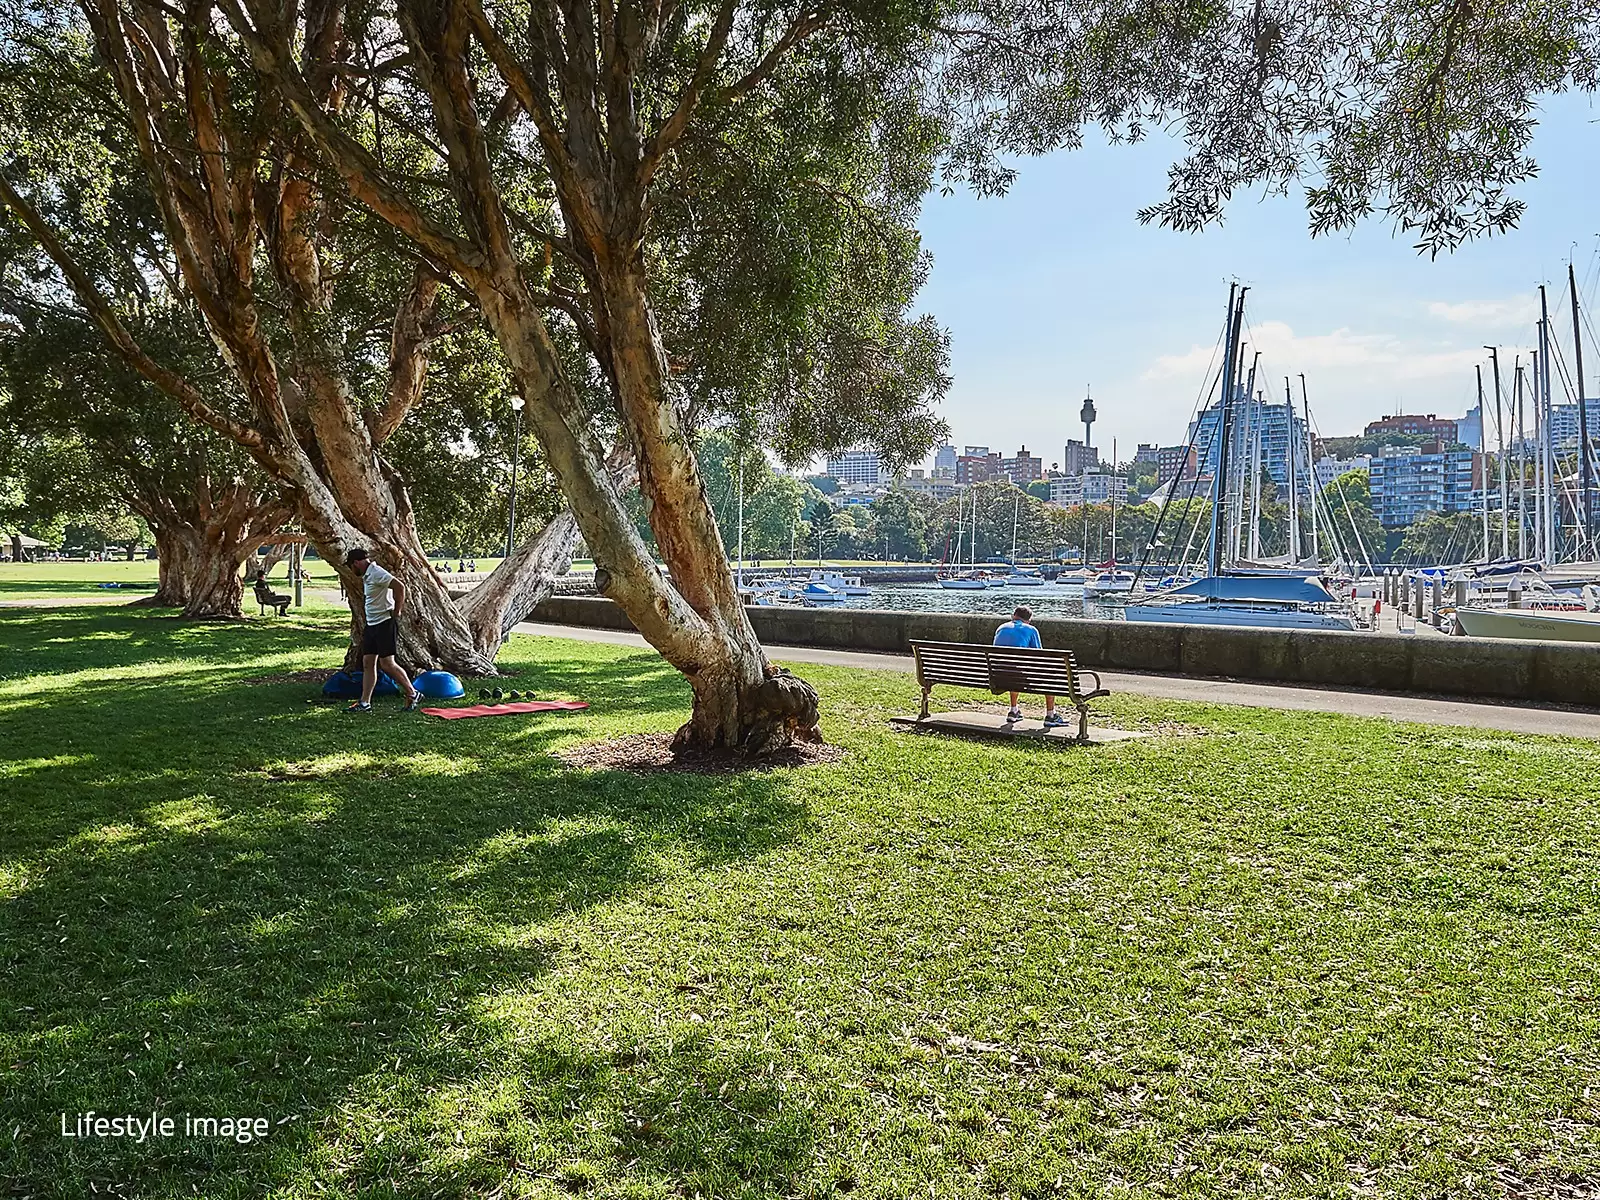 Photo #25: 5A/23 Thornton Street, Darling Point - Sold by Sydney Sotheby's International Realty